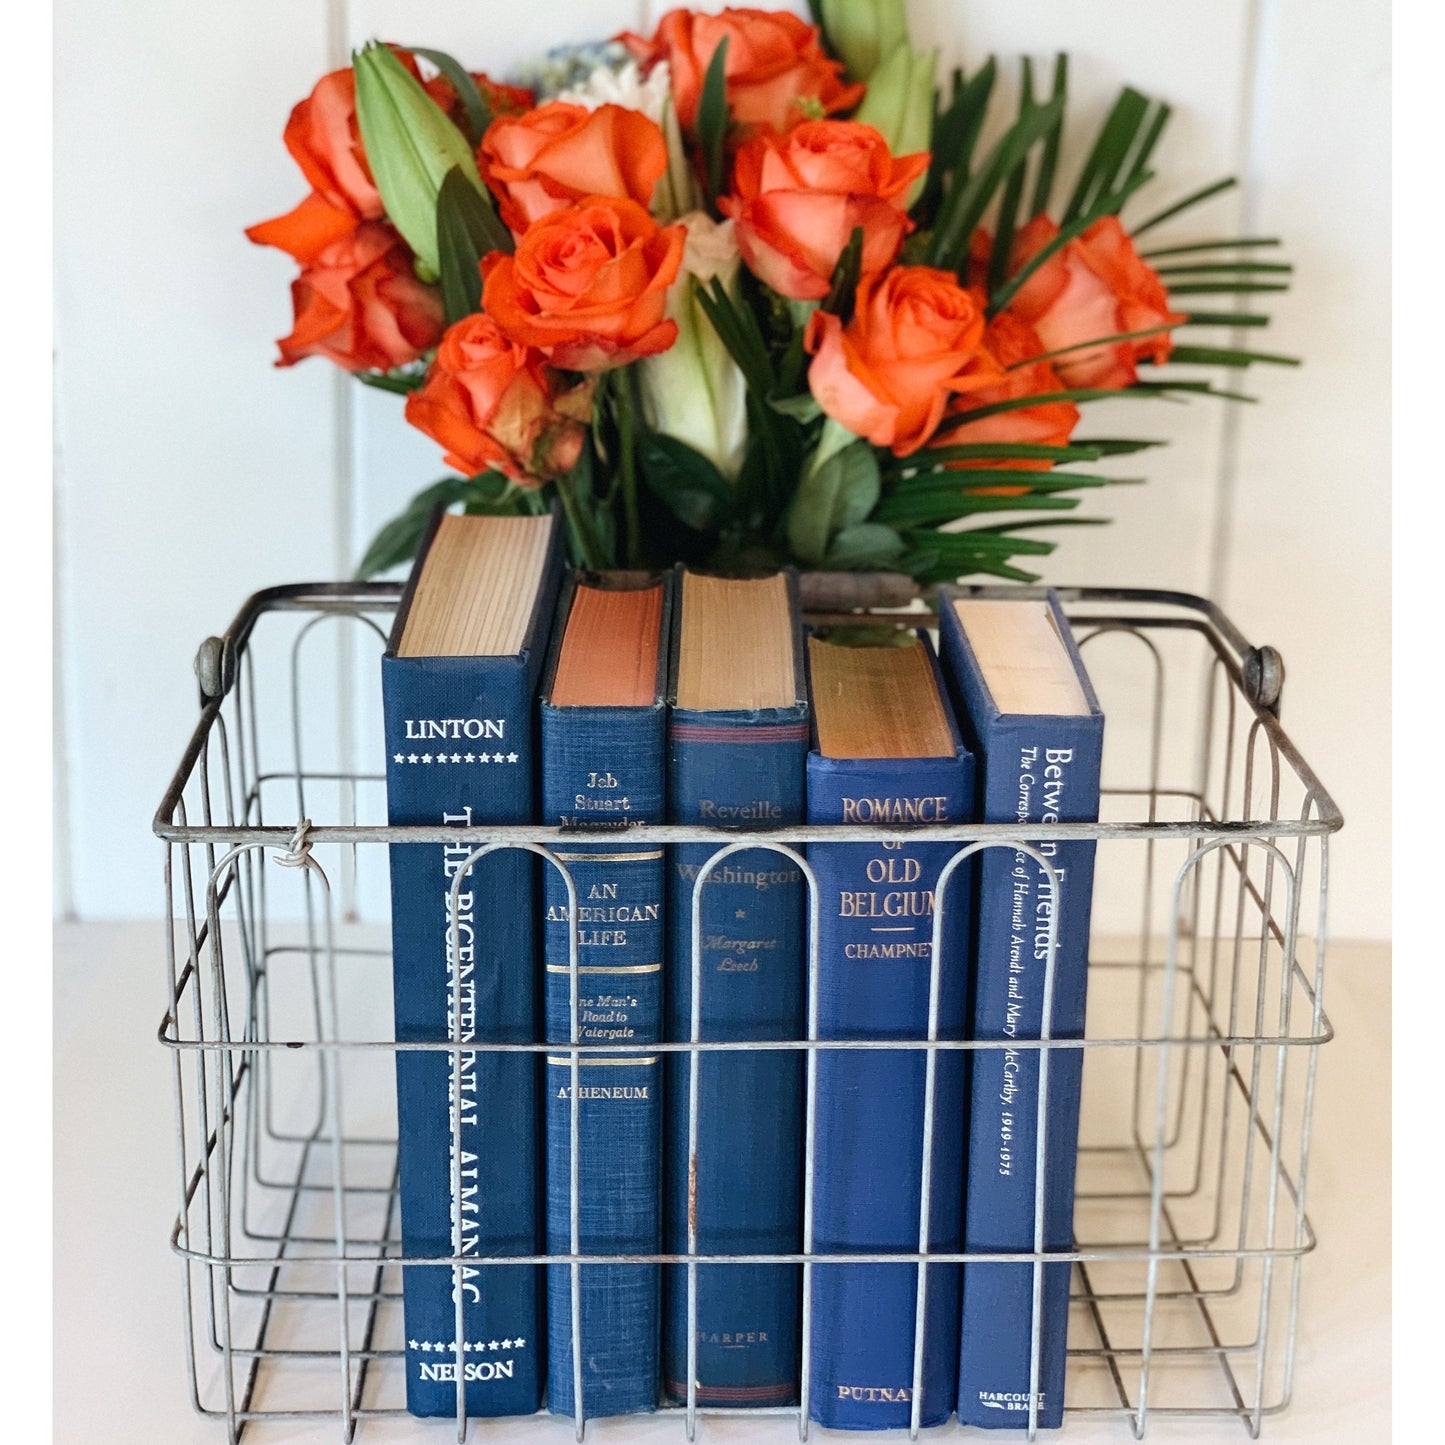 Indigo Blue Oversized Books for Decor, Vintage Books By Color for Shelf Styling